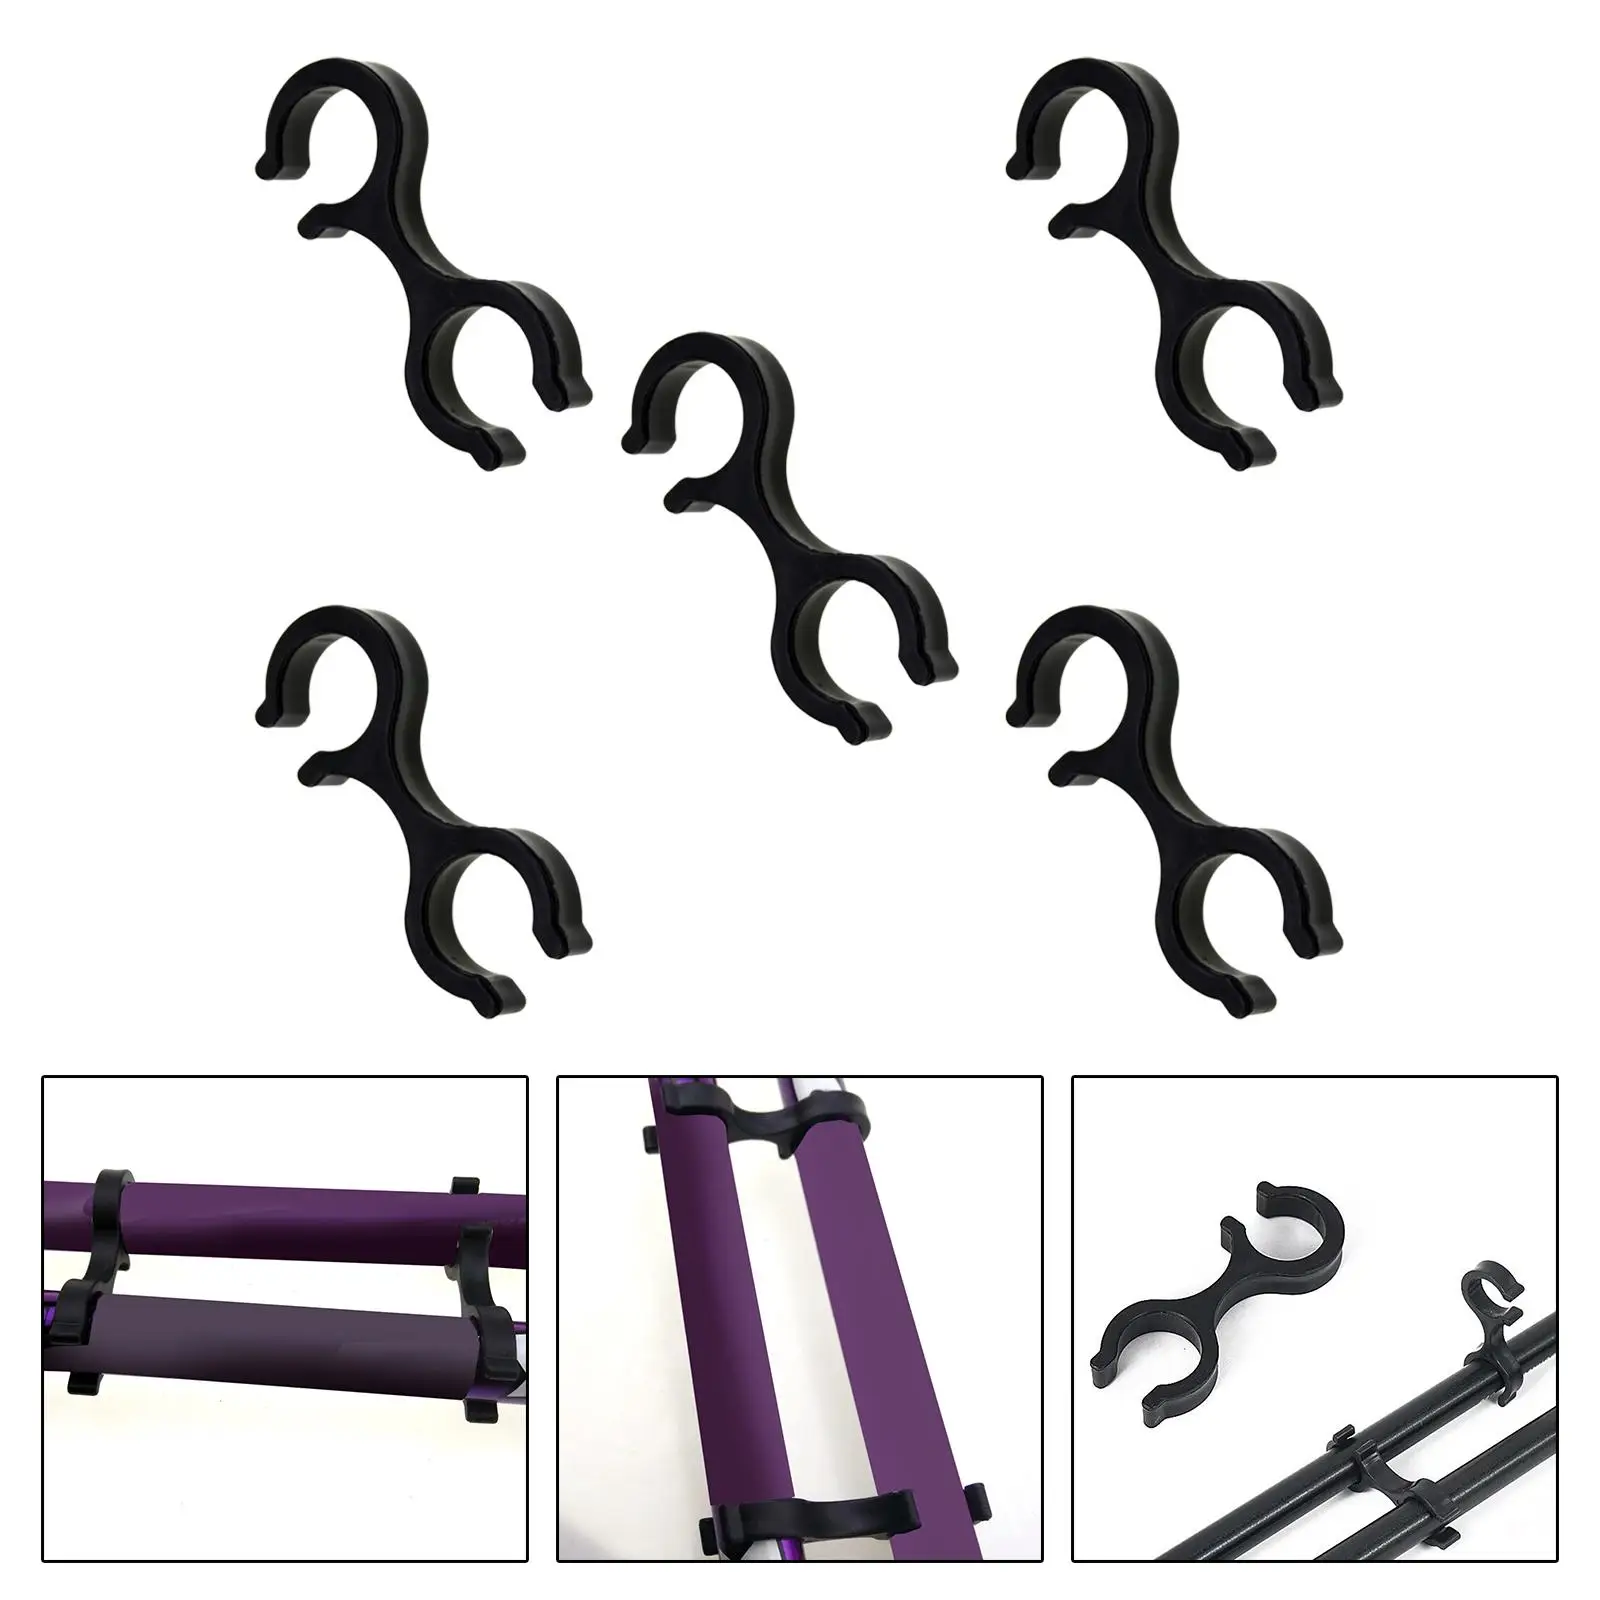 Trekking Pole Clips Outdoor Components Attachment 5Pcs Accessories Replace for Climbing Camping Climbing Rod Hiking Poles Crutch